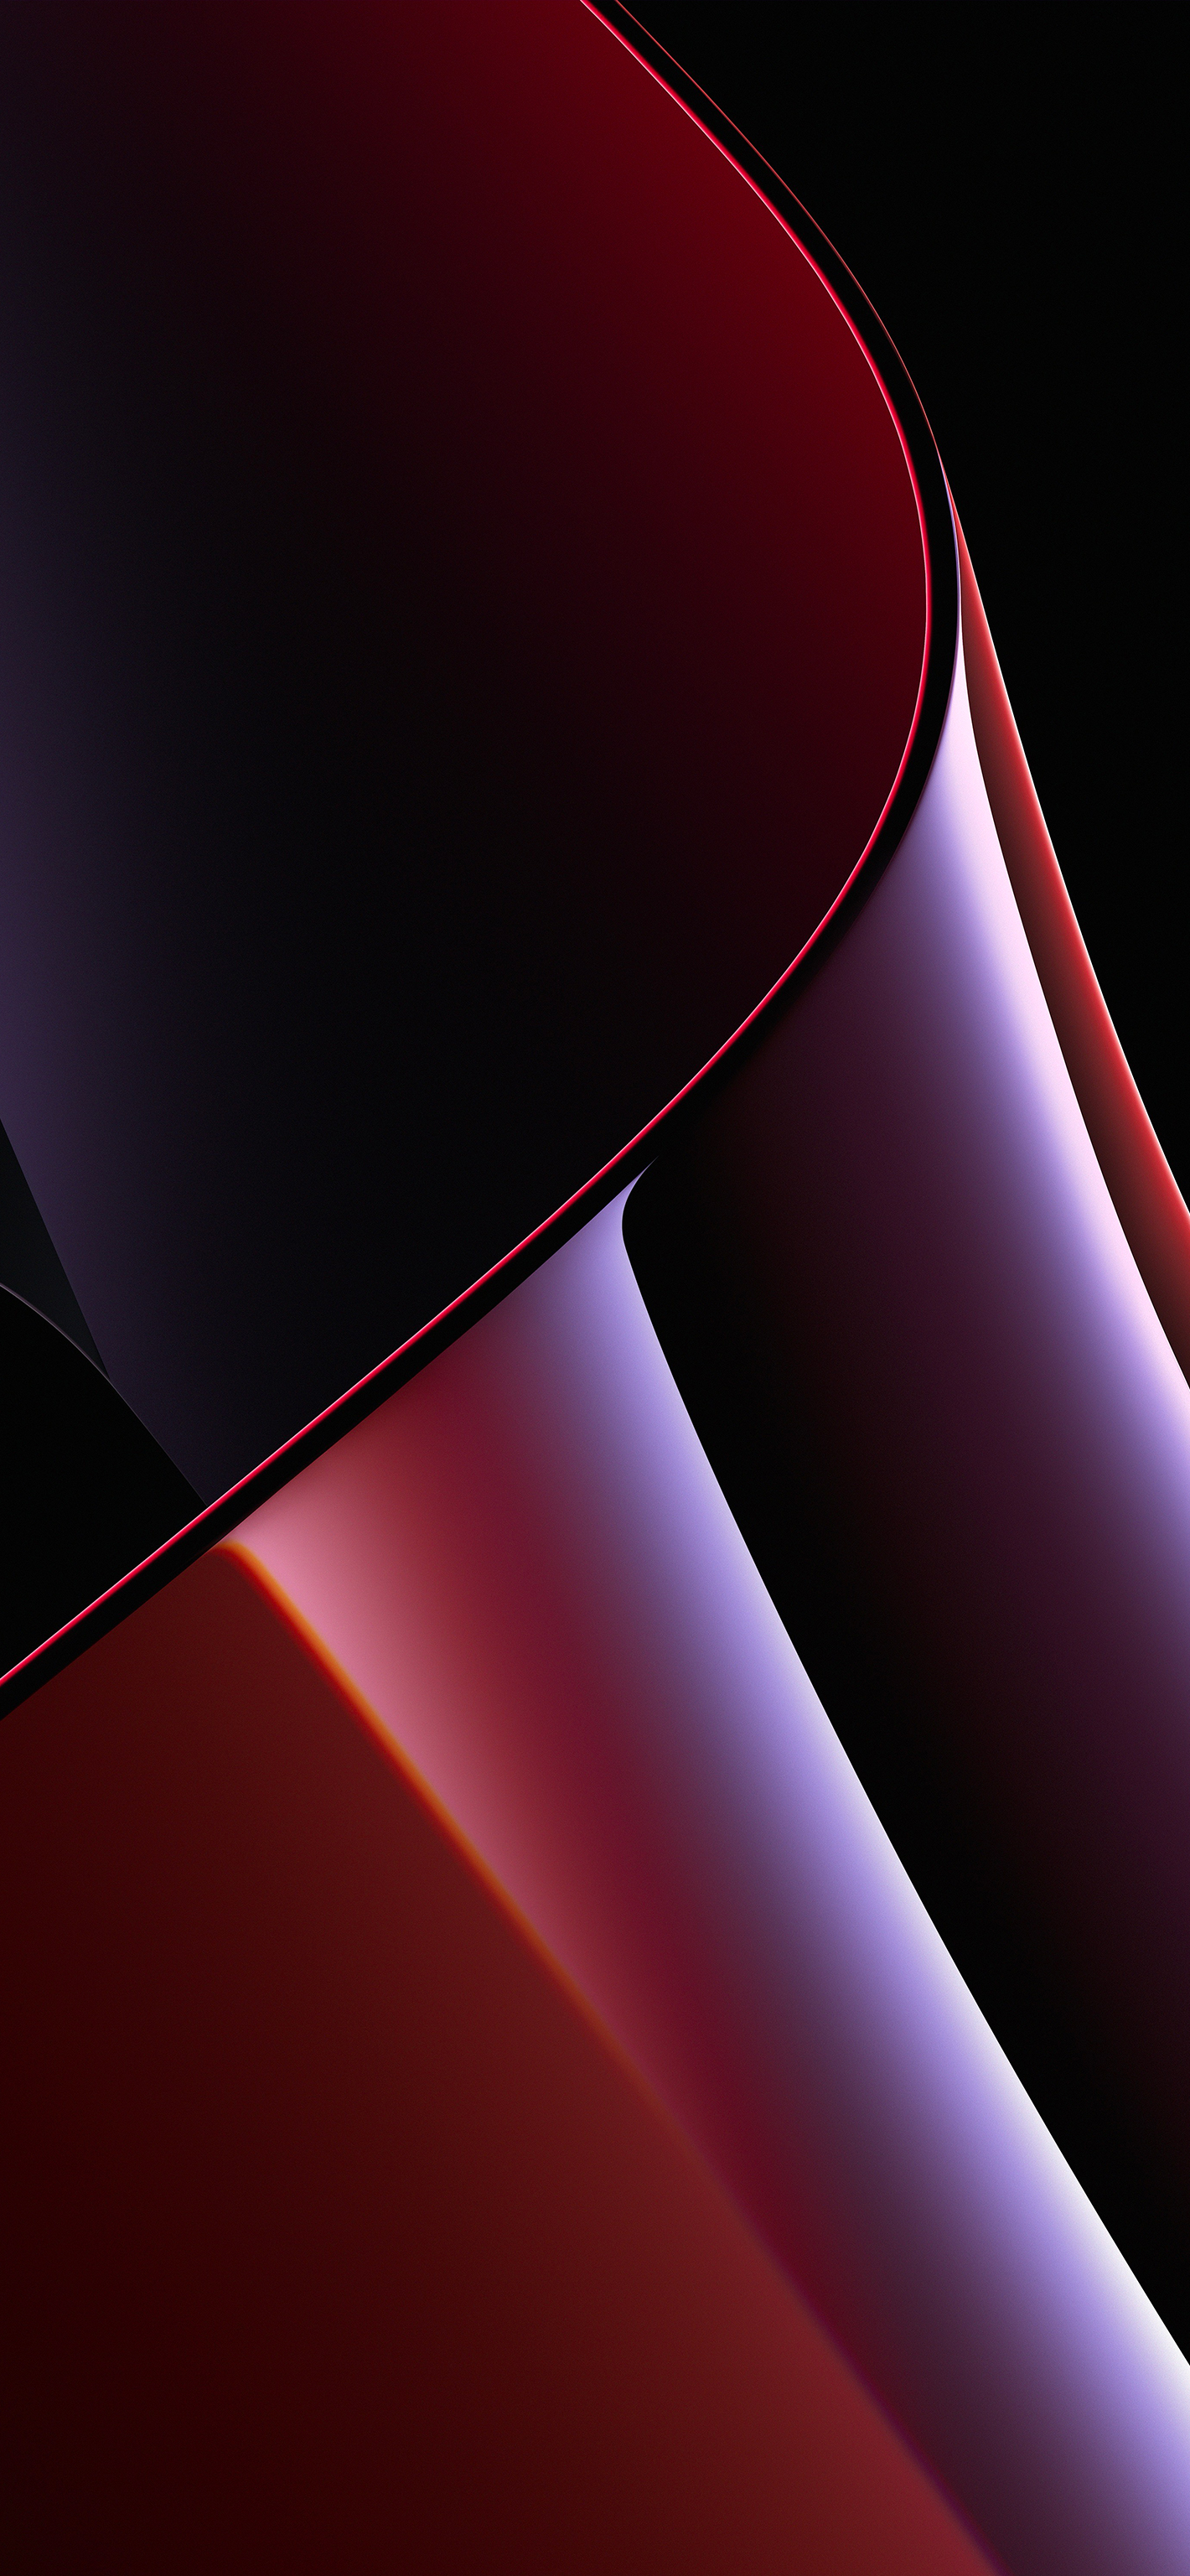 iPhone11papers.com | iPhone11 wallpaper | vt15-line-dark-red-color -line-pattern